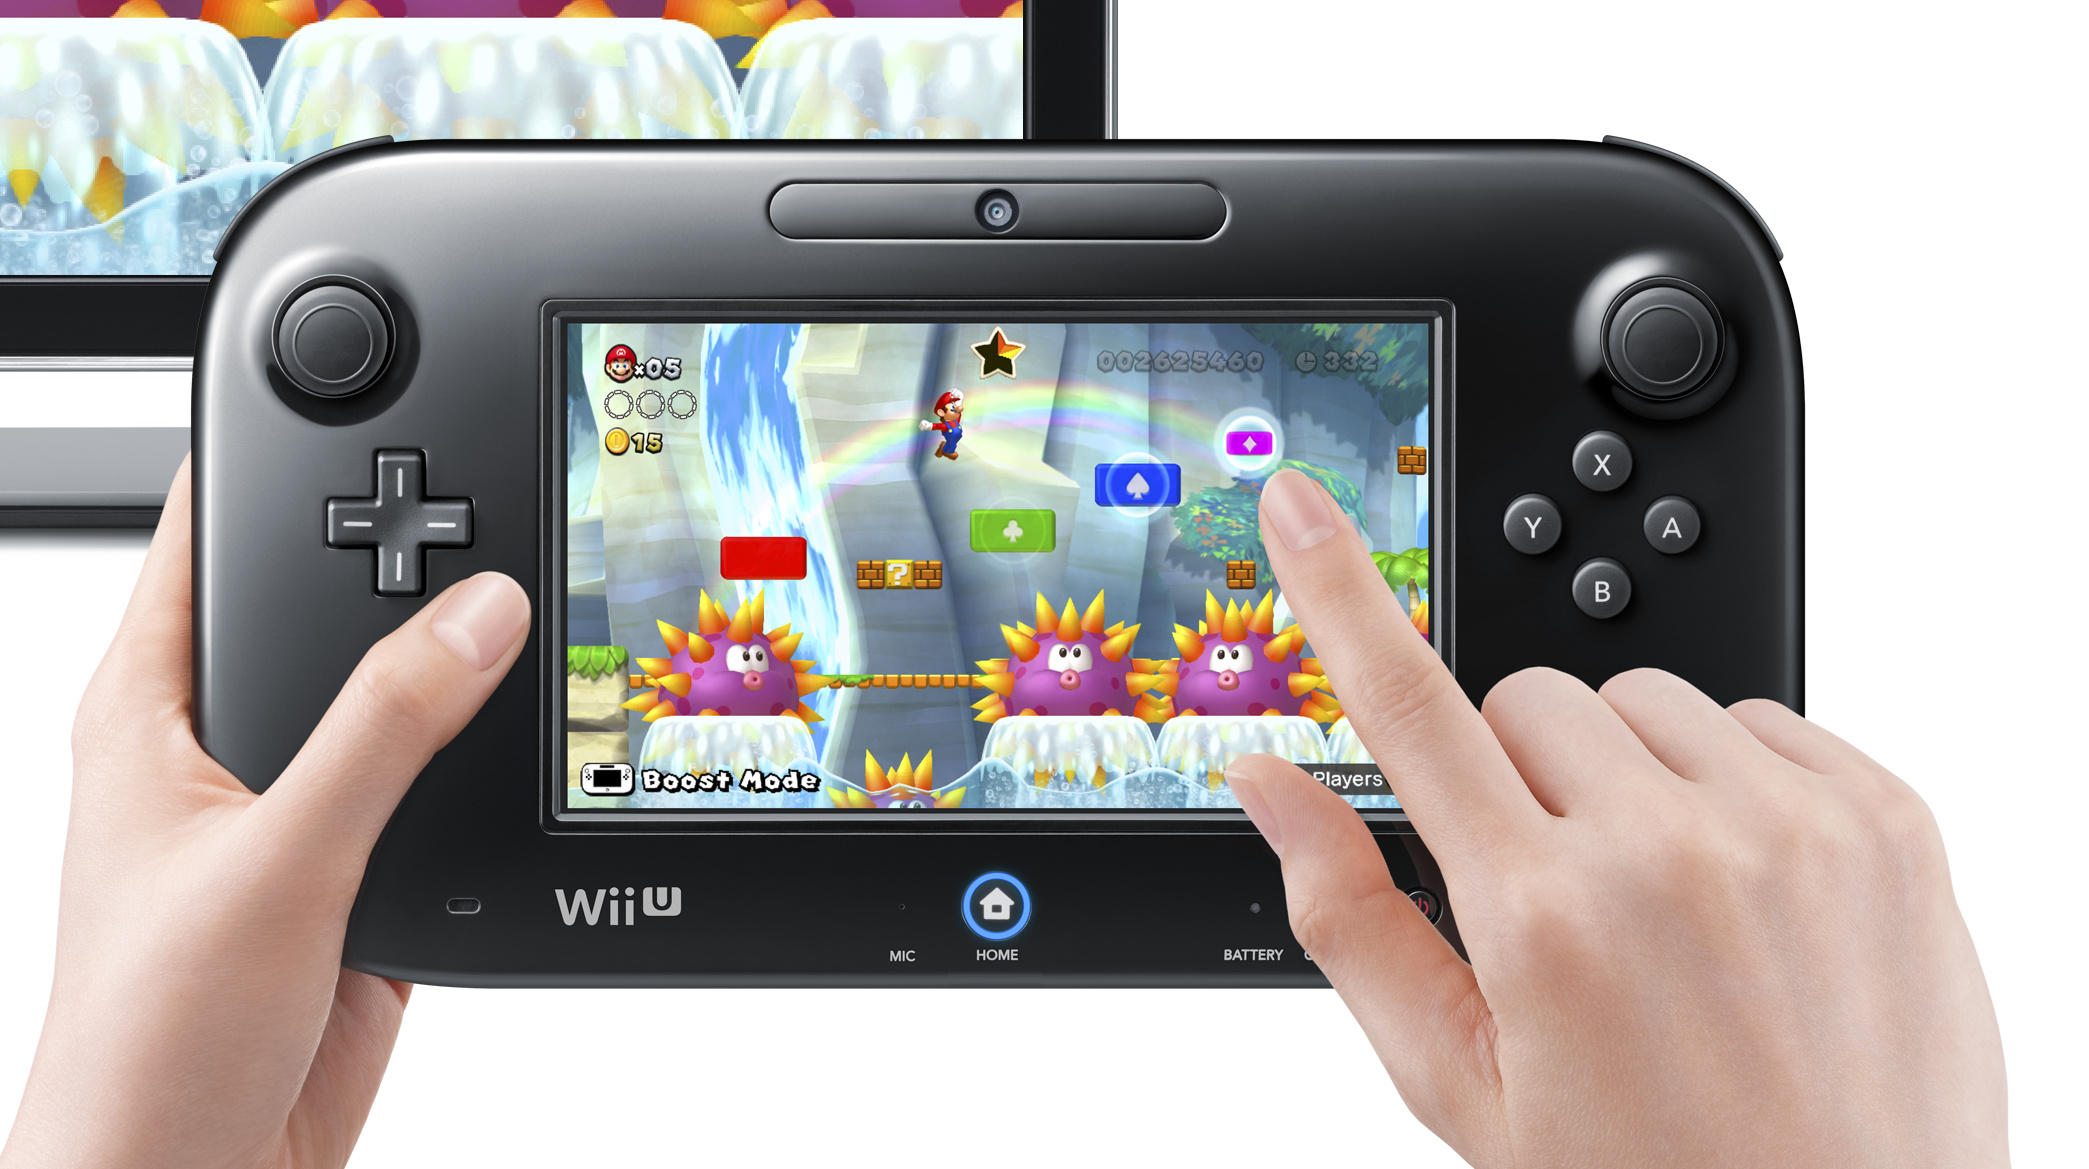 The Future That Nintendo Tried To Predict With Wii U